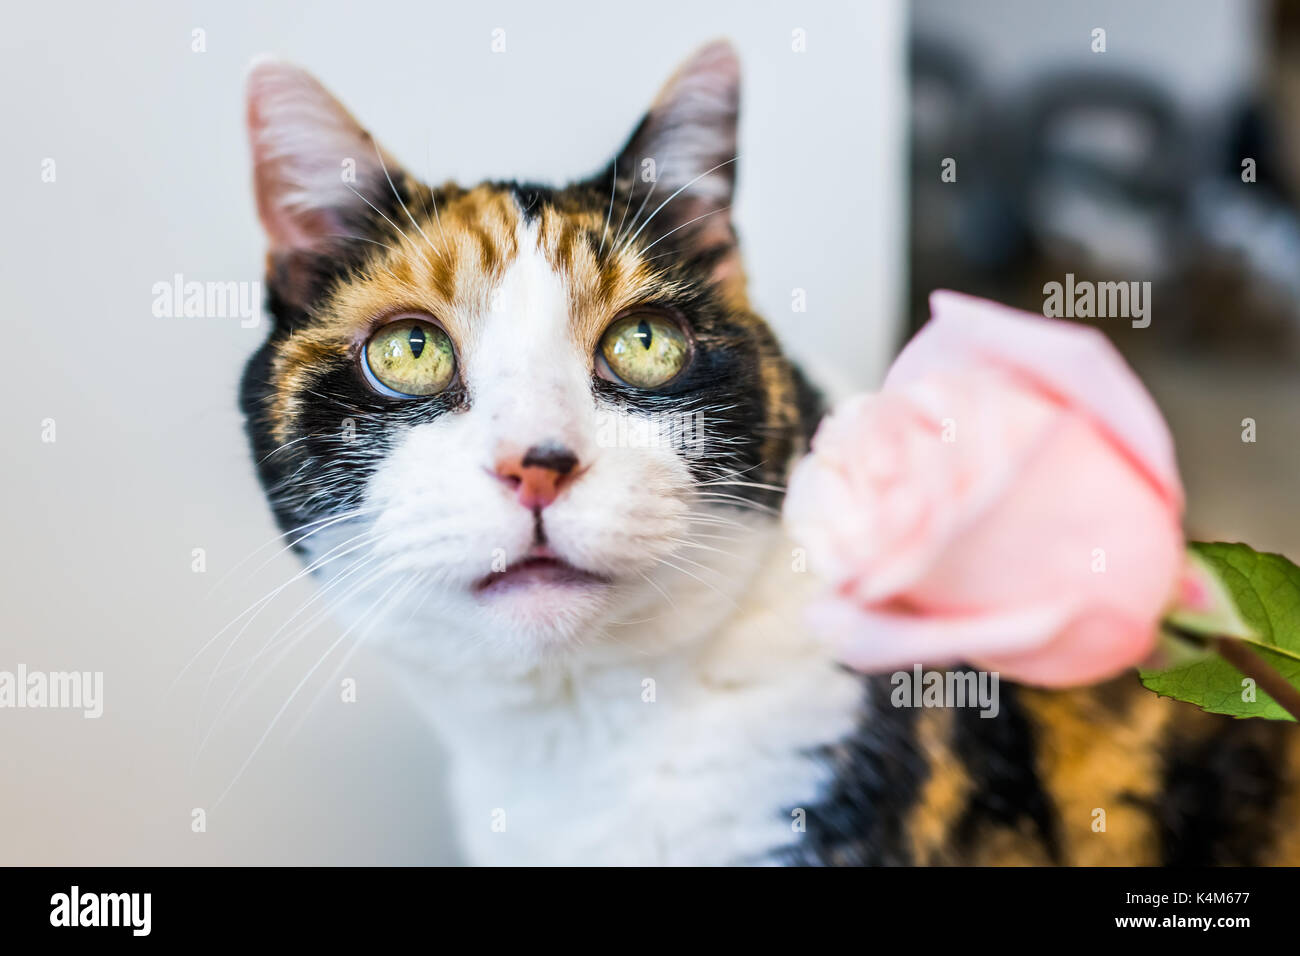 Closeup portrait of curious calico cat smelling pink rose flower with big eyes Stock Photo